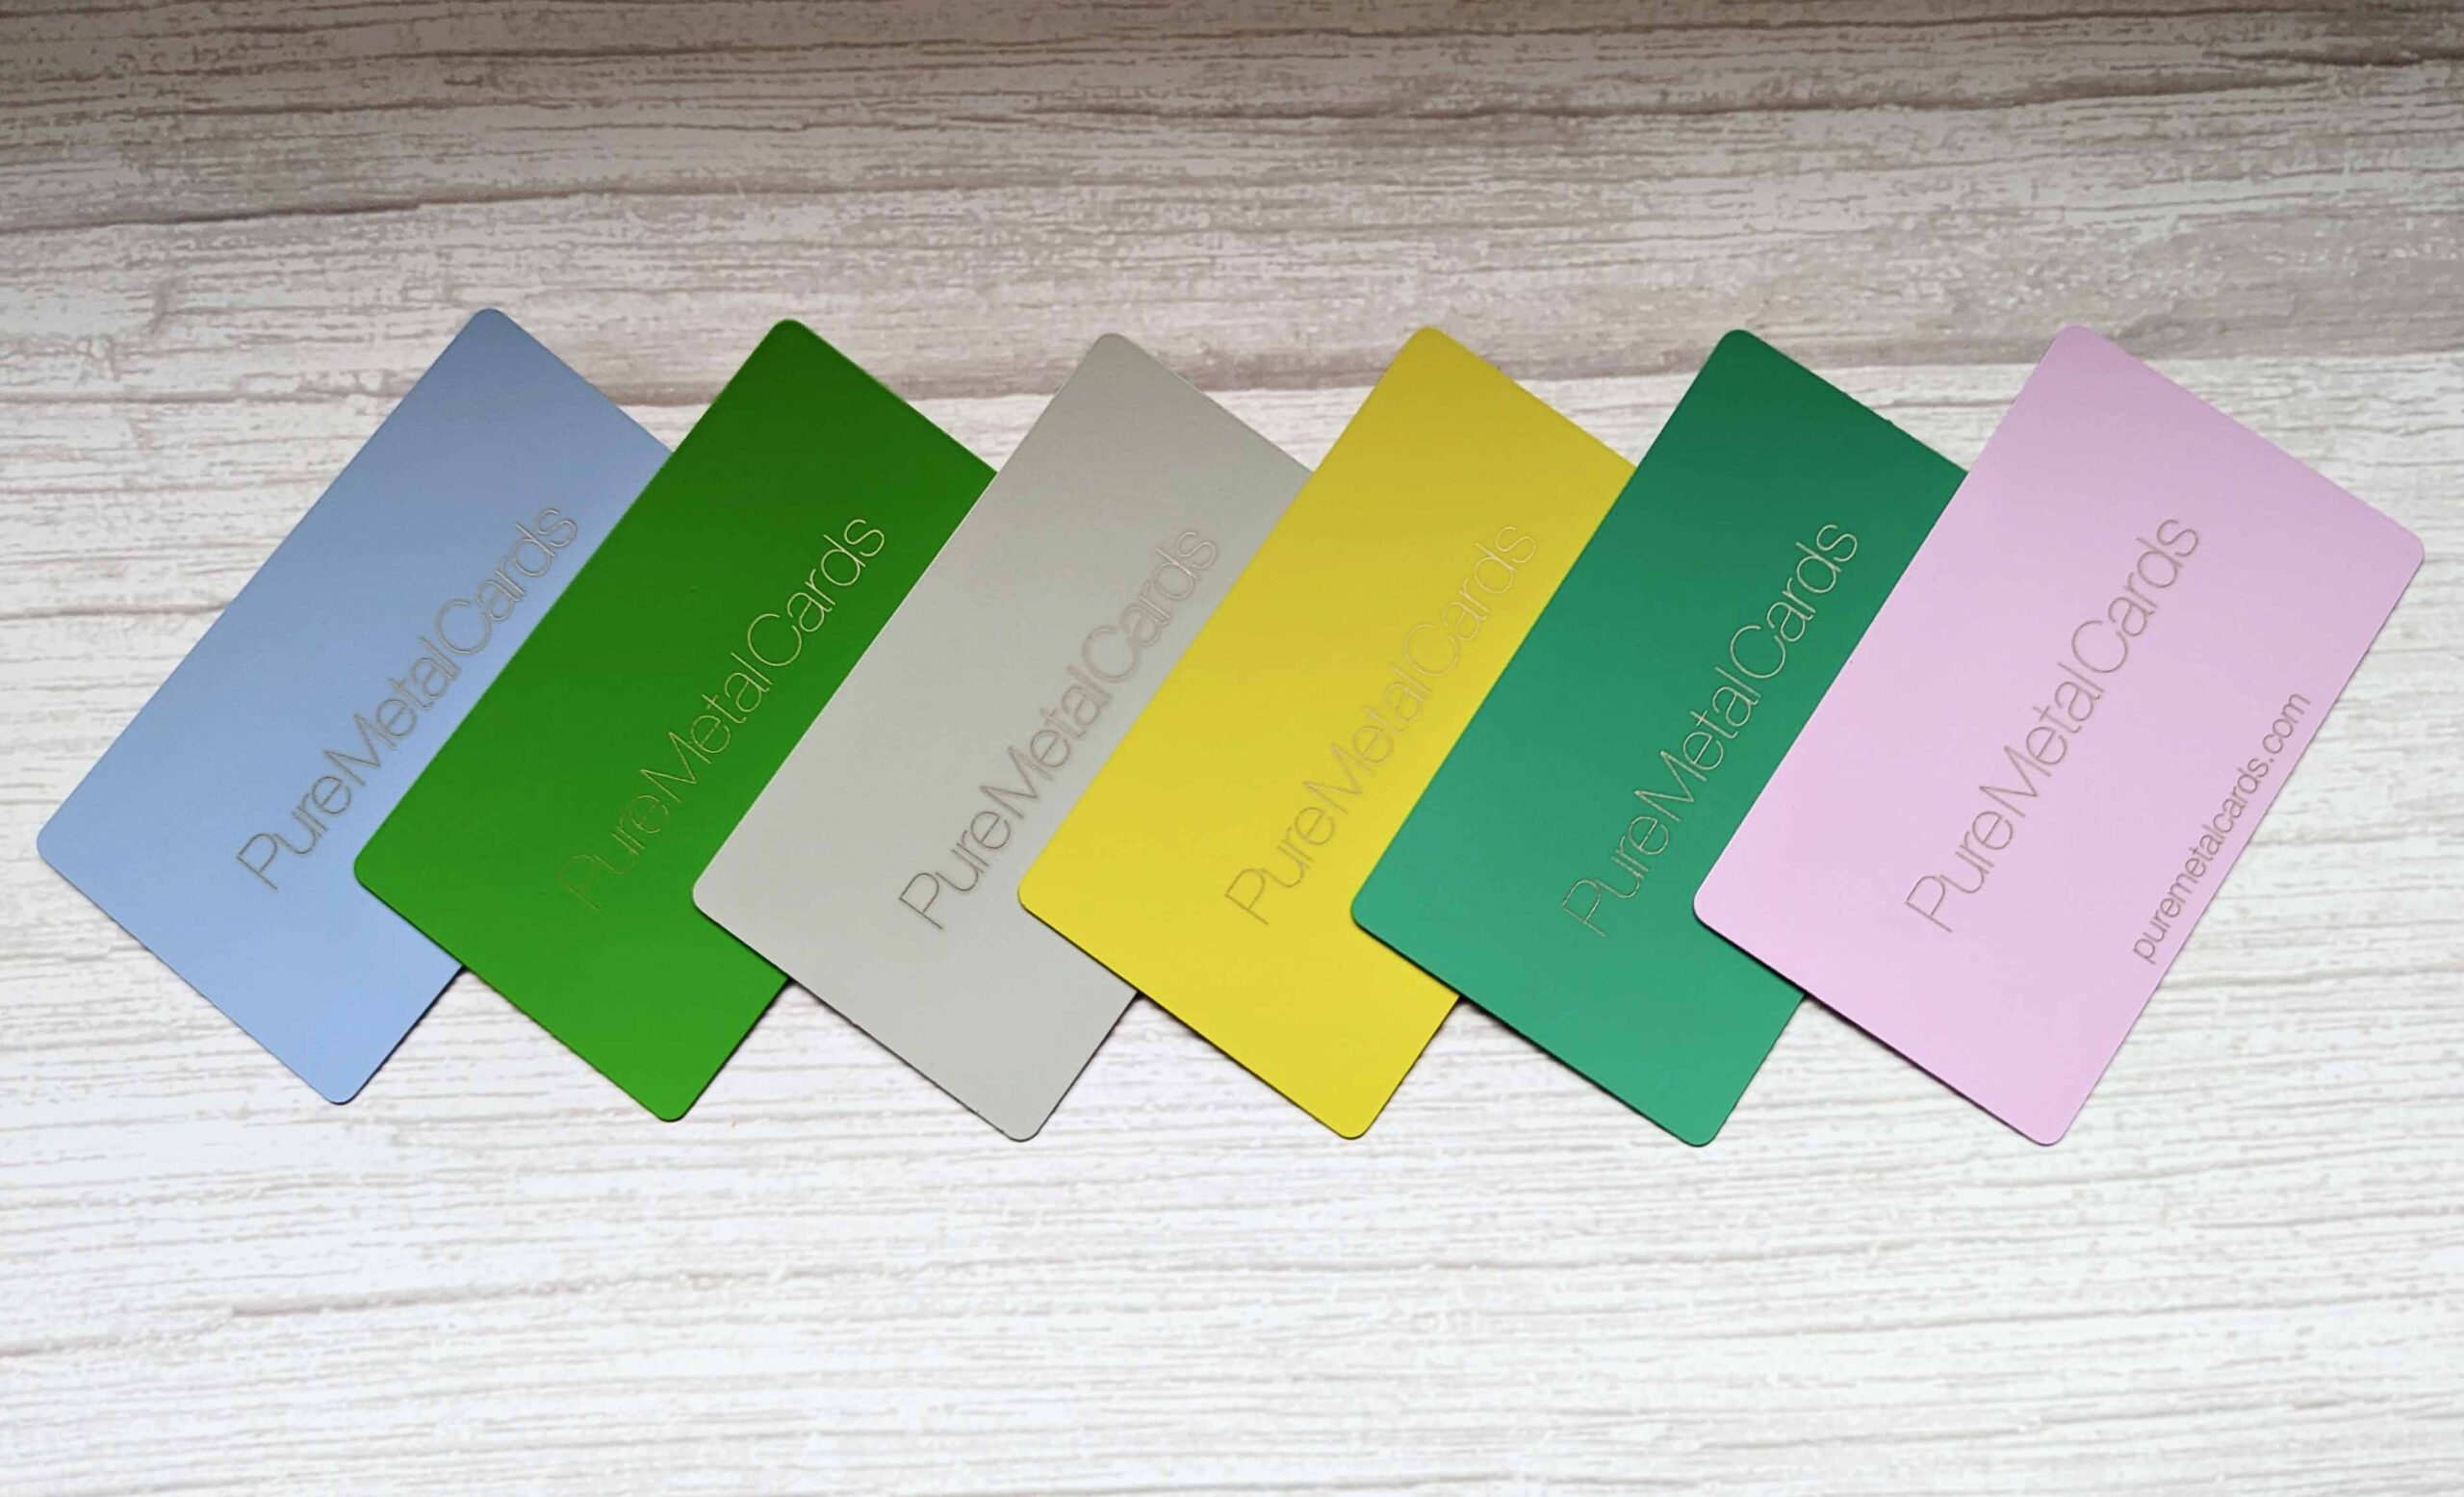 Pure Metal Cards - metal business cards - Pantone color coded